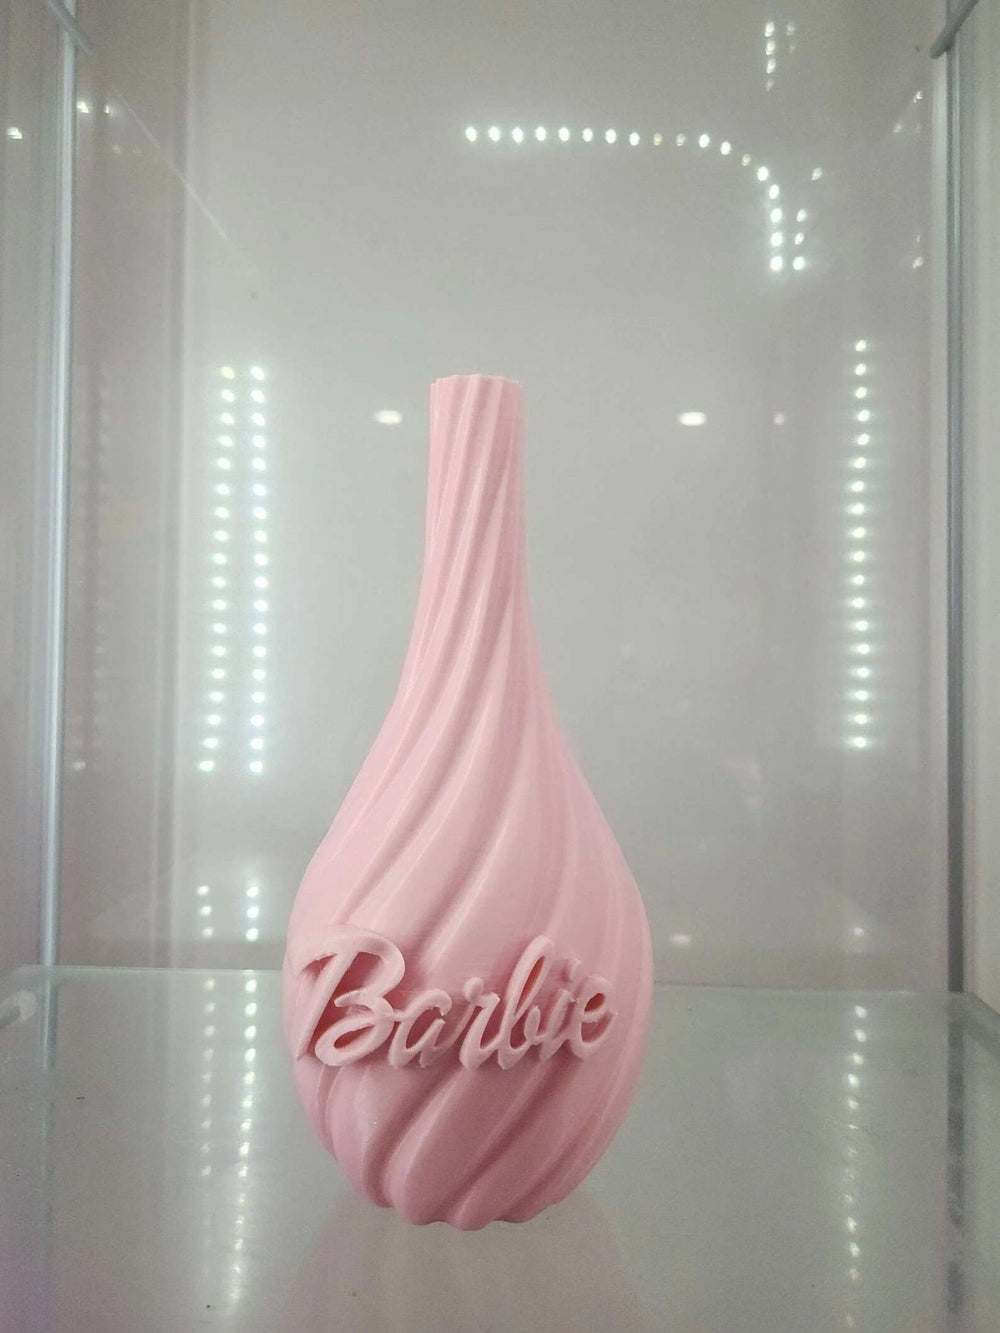 PERSONALIZED 3D Printed Barbie Flower Vase Decoration Barbie or Your Name! Desk Sign Decoration Mattel 8"x4", the top hole is .5" wide - JDColFashion